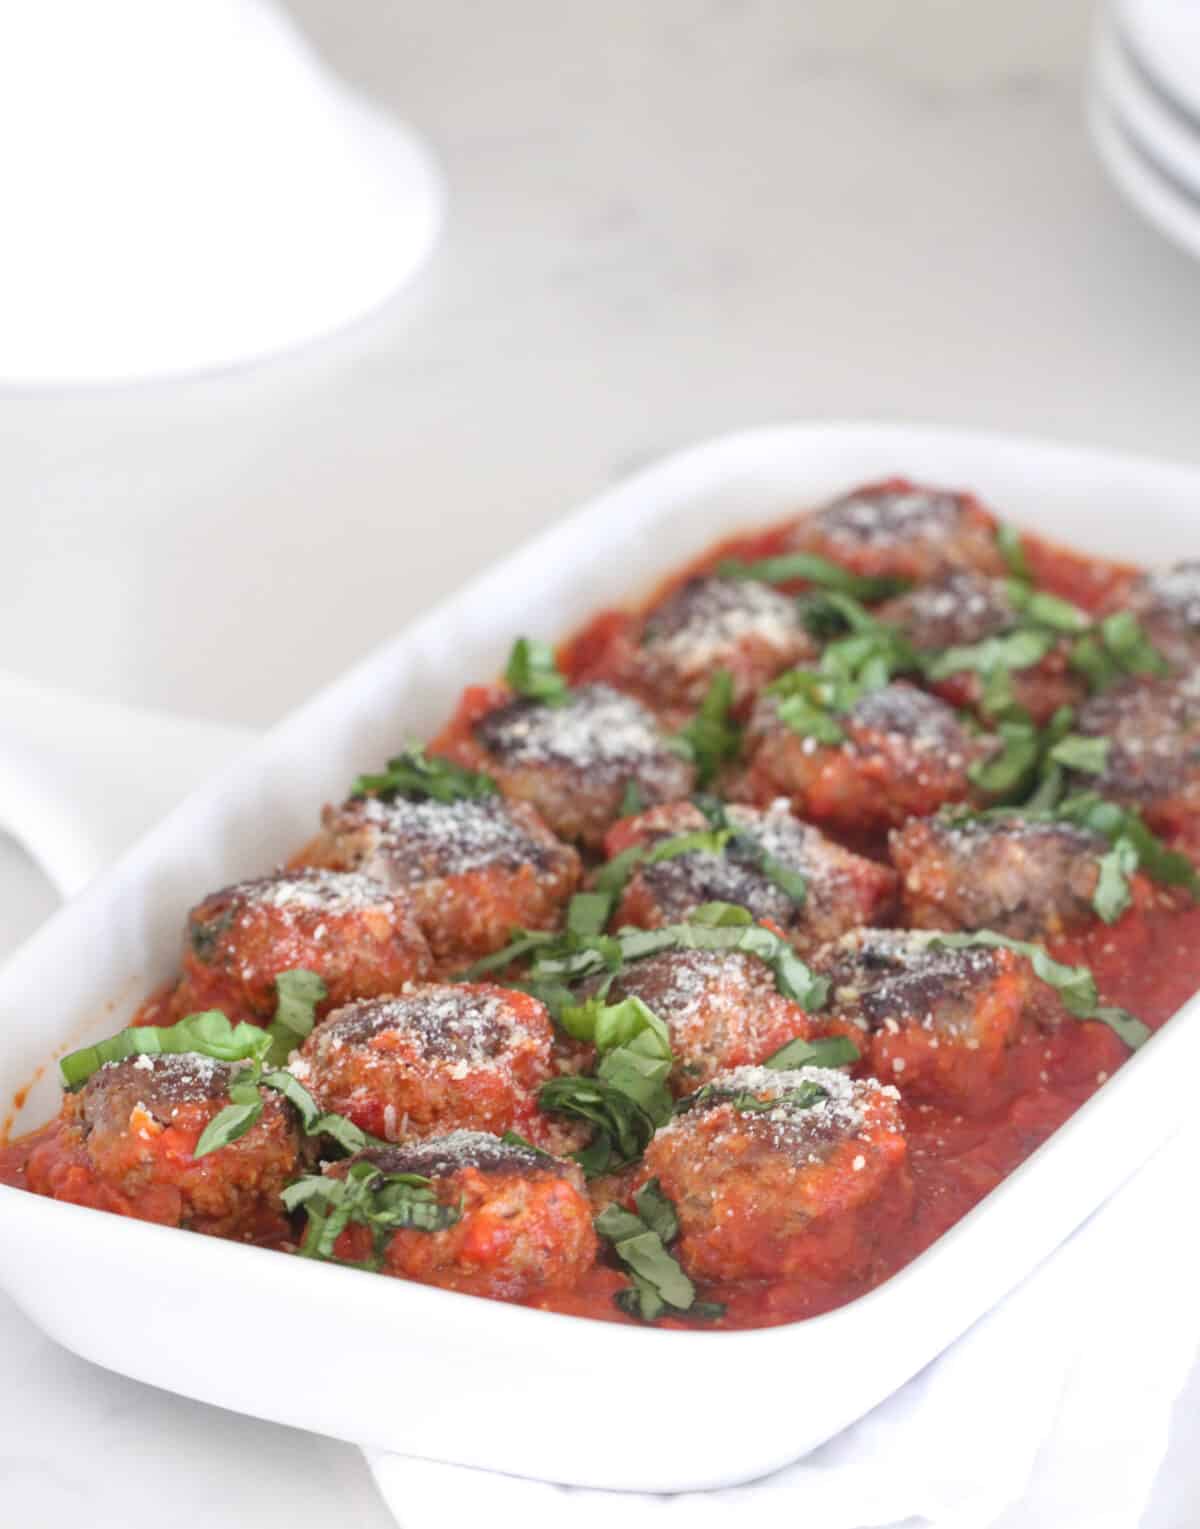 homemade meatballs in pasta sauce on serving dish